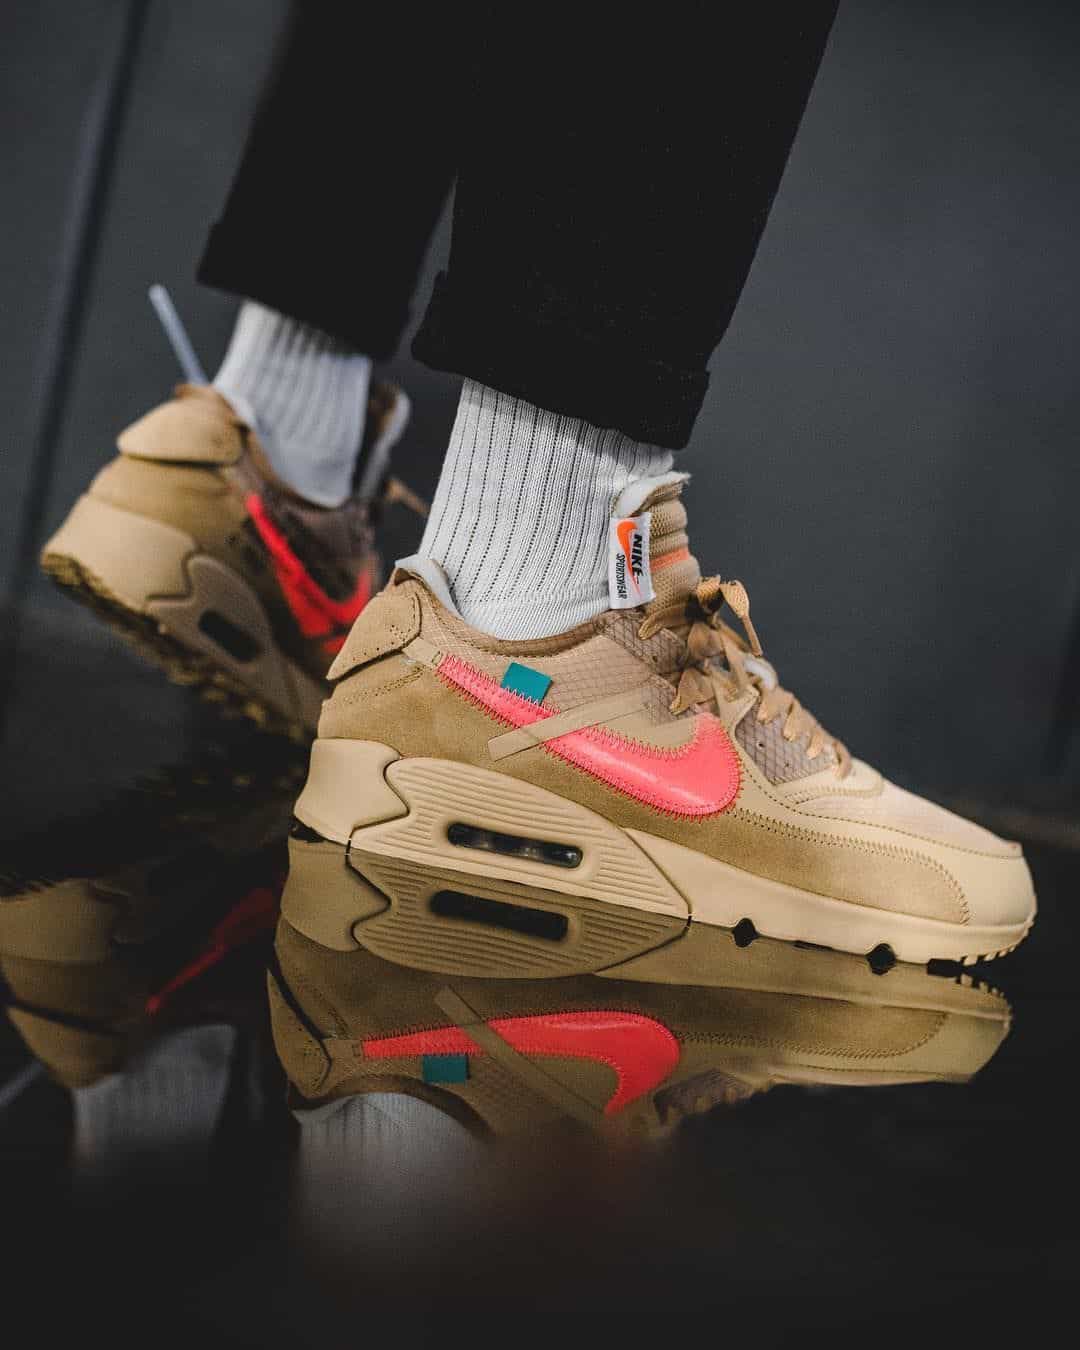 How To Spot Fake Off-White Air Max 90 Desert Ore - Legit Check By Ch